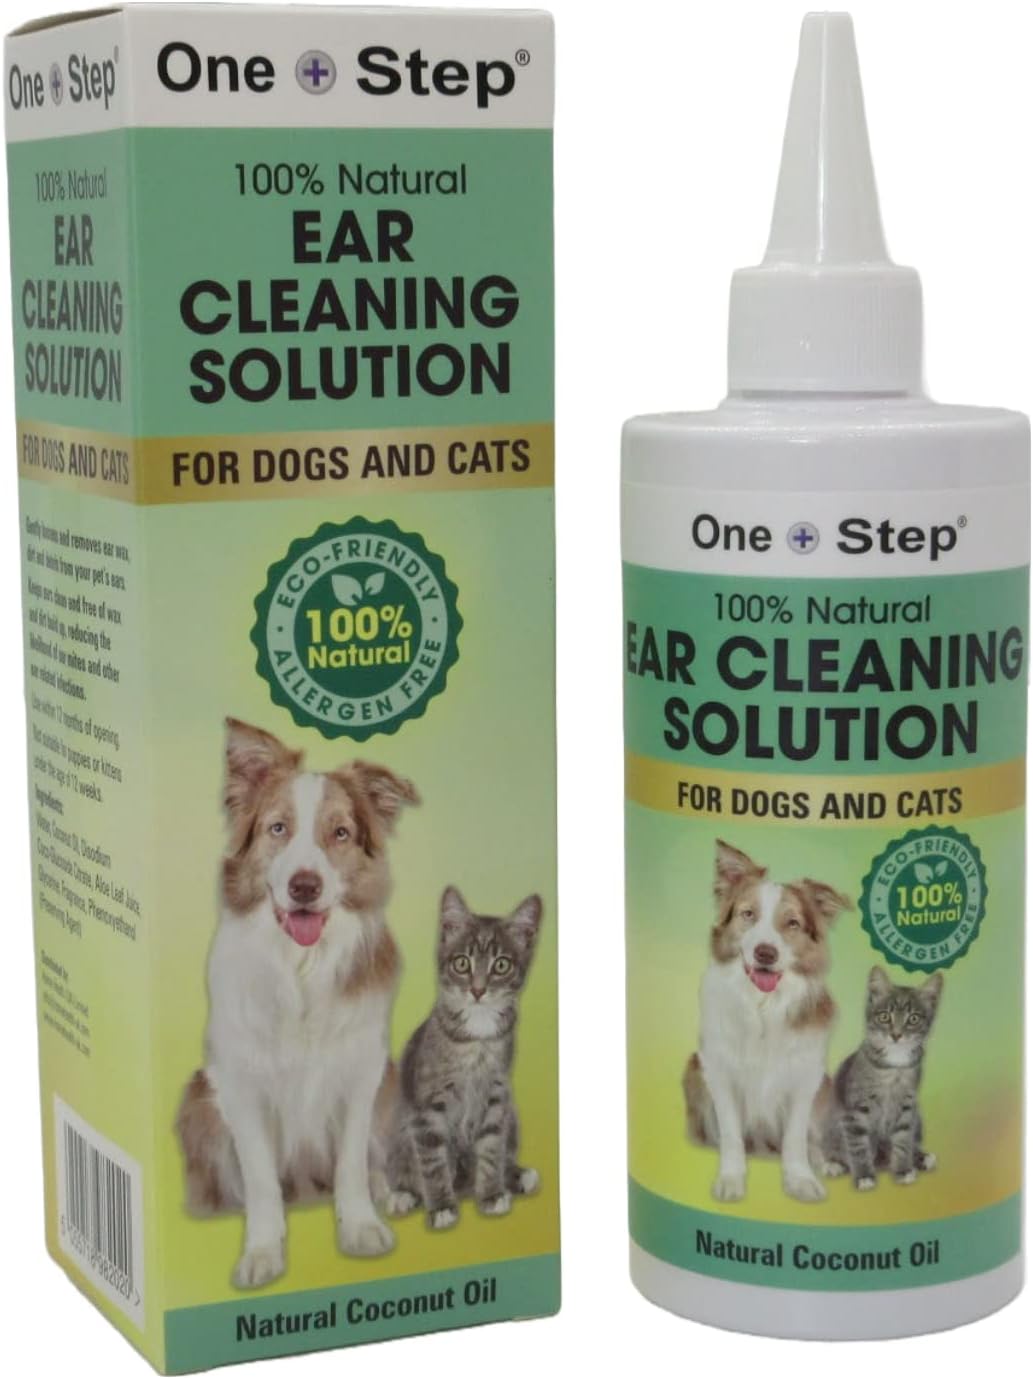 One Step Pet Ear Cleaner for Dogs & Cats 237ml, 100% Natural Cleaning Solution used to Stop Shaking Head, Itchy, Smelly Ears & Wax Removal, Organic Coconut Oil & Aloe Vera Leaf Juice Formula